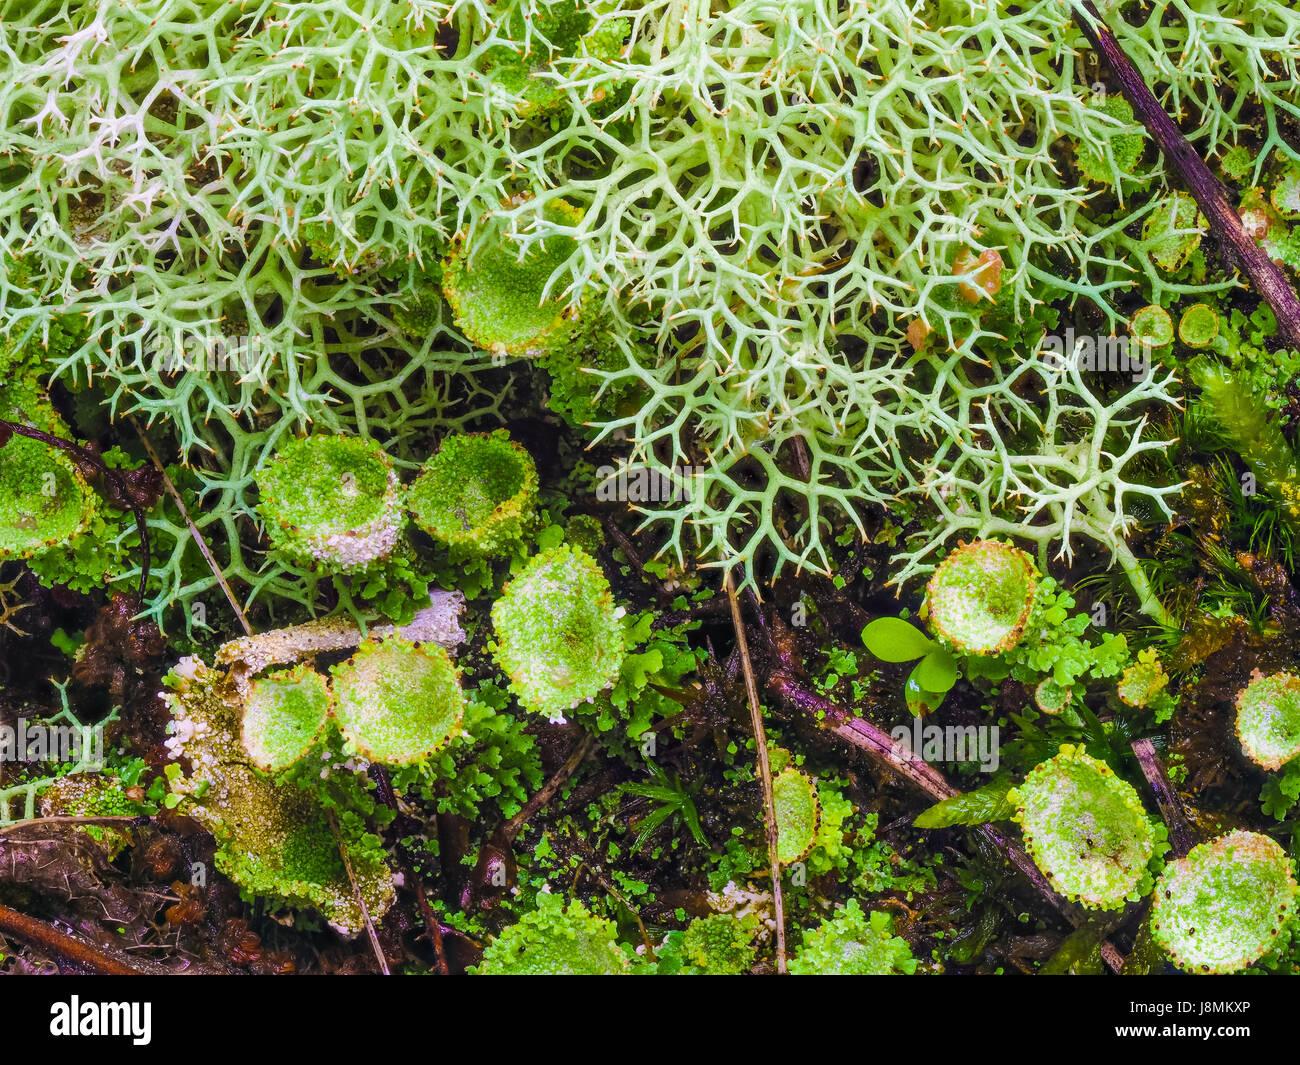 various-mosses-and-lichens-on-the-forest-floor-at-hot-springs-national-J8MKXP.jpg